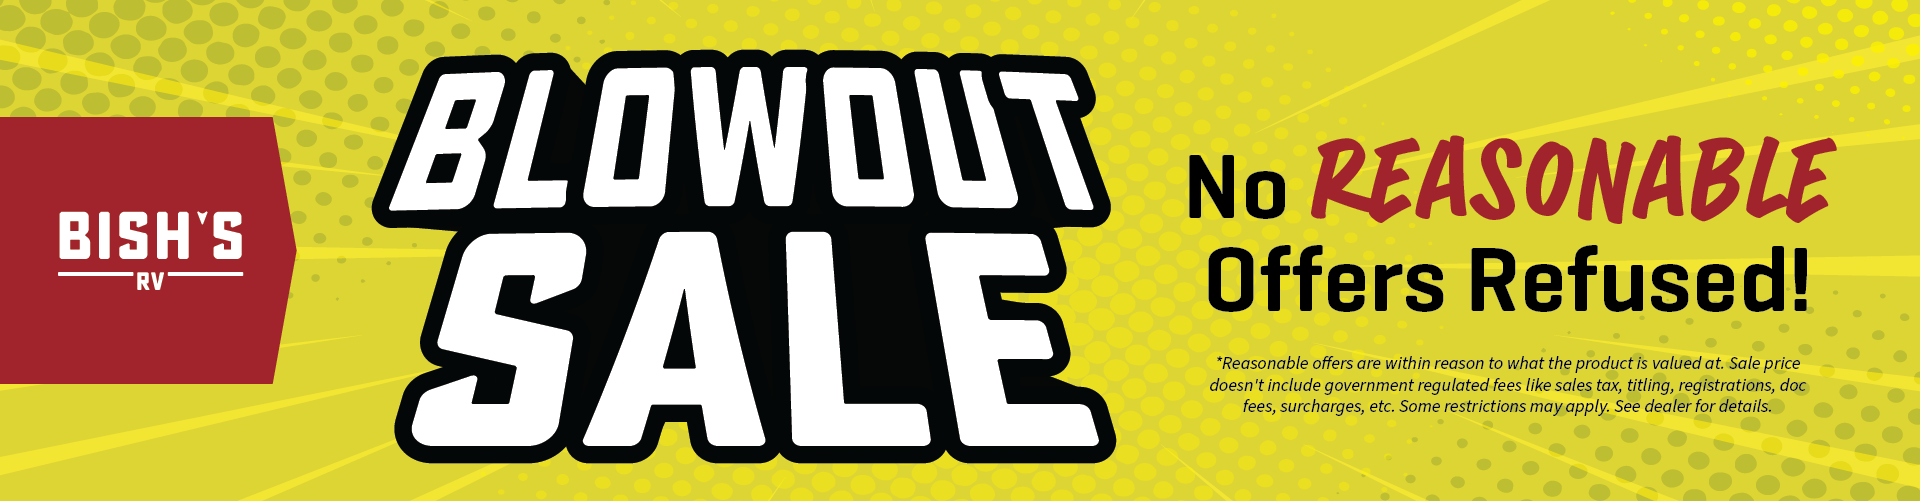 Blowout Sale Pricing - No Reasonable Offers Refused! See dealer for details.